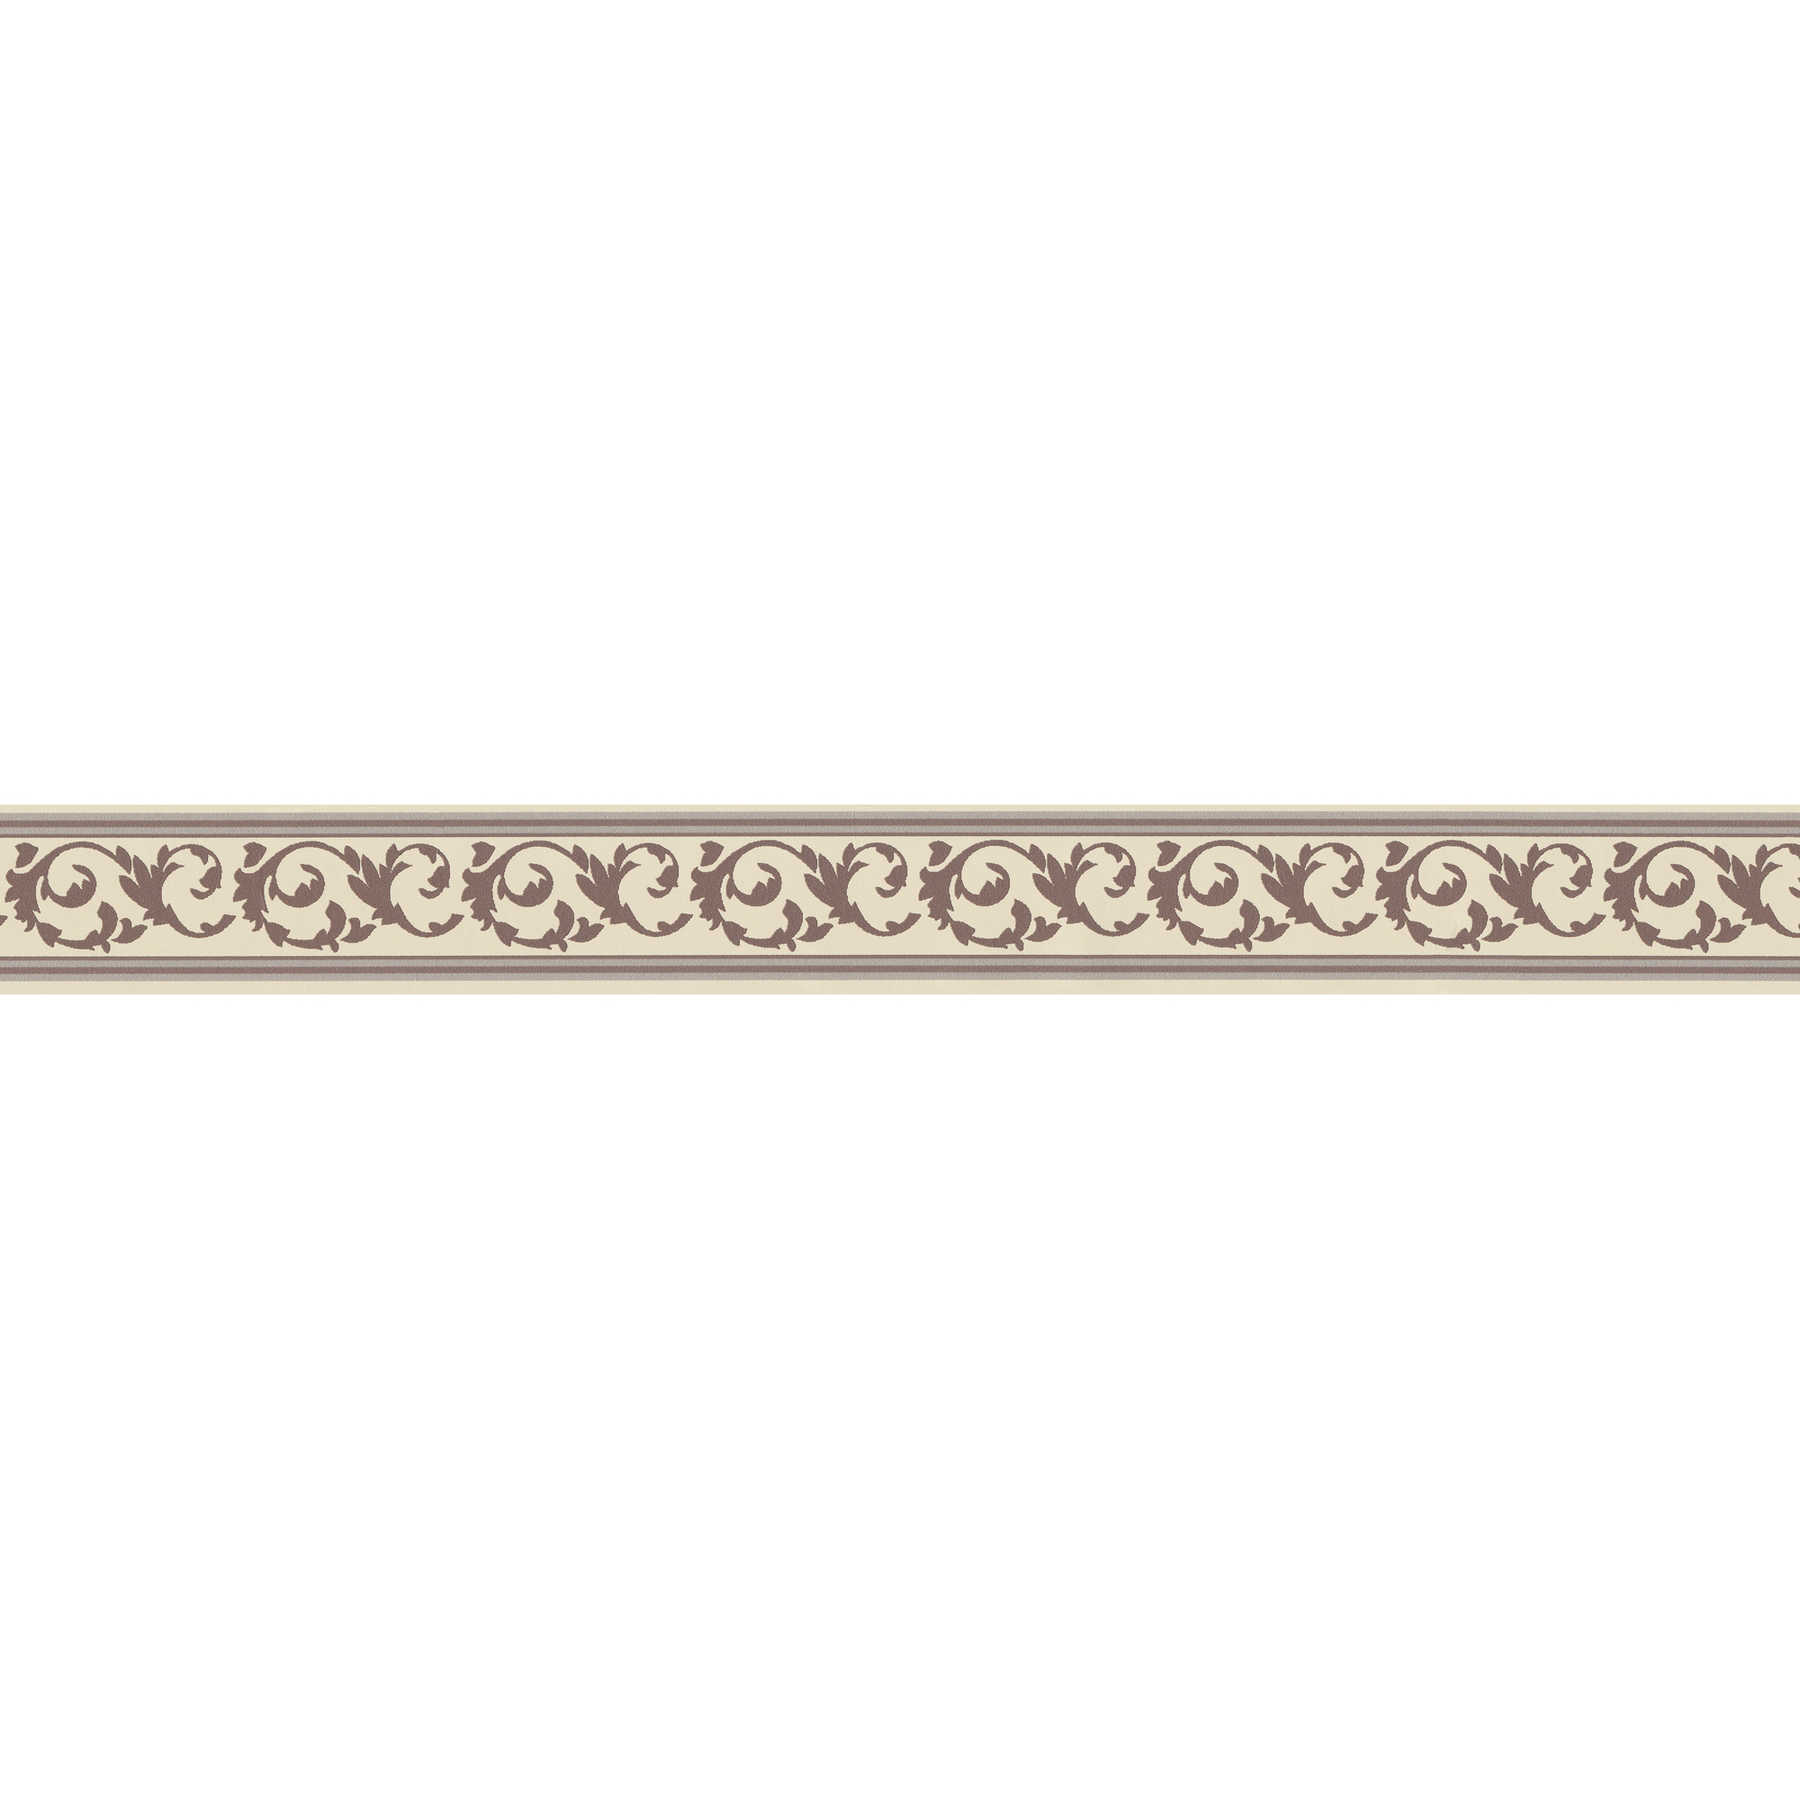 Border with natural tendril pattern - Brown, Beige
